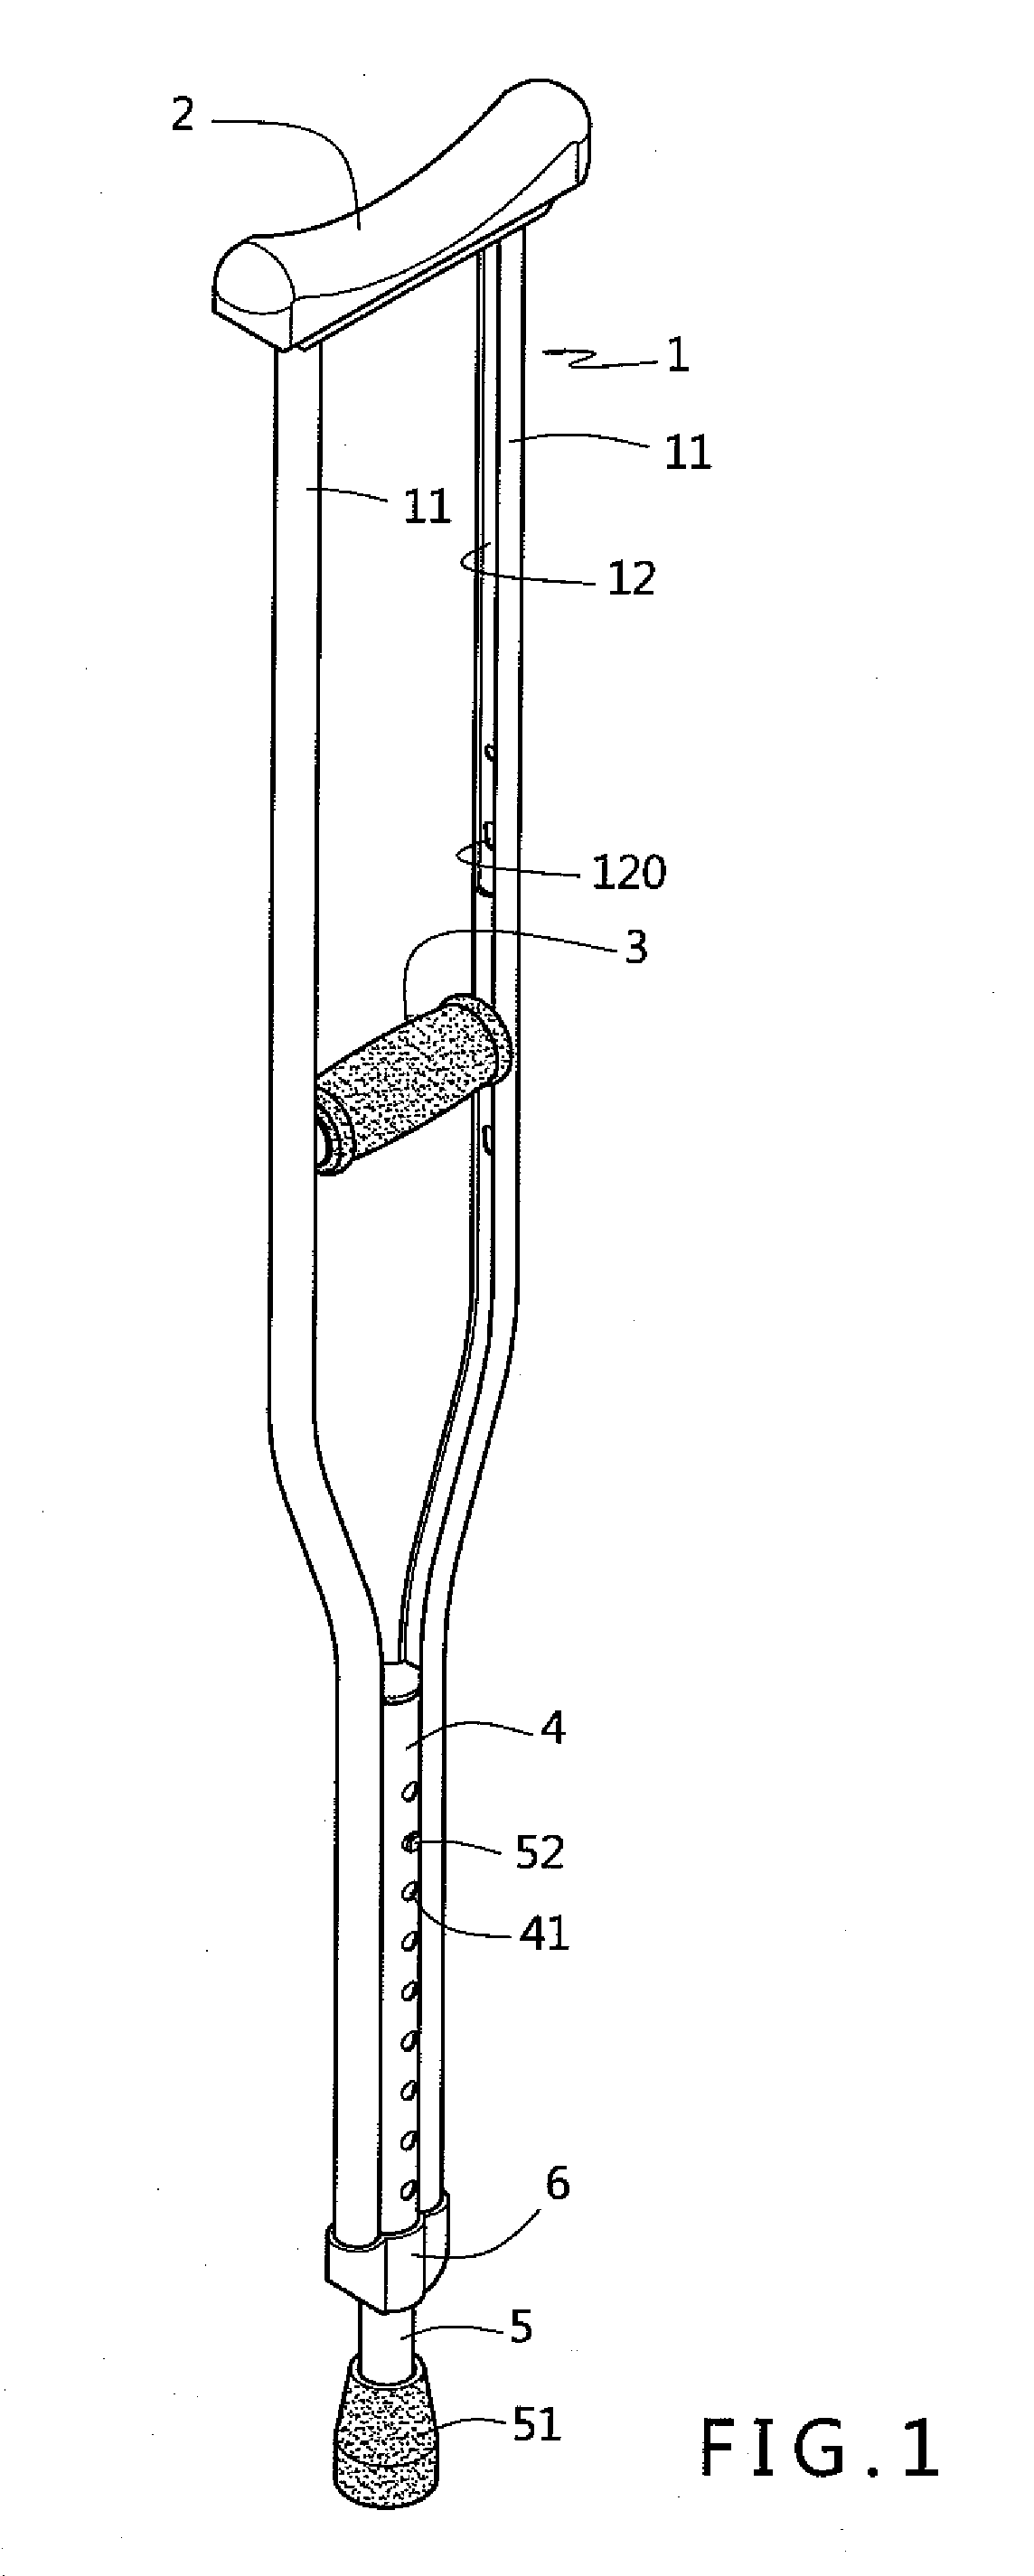 Reinforced axillary crutch with adjustable handgrip